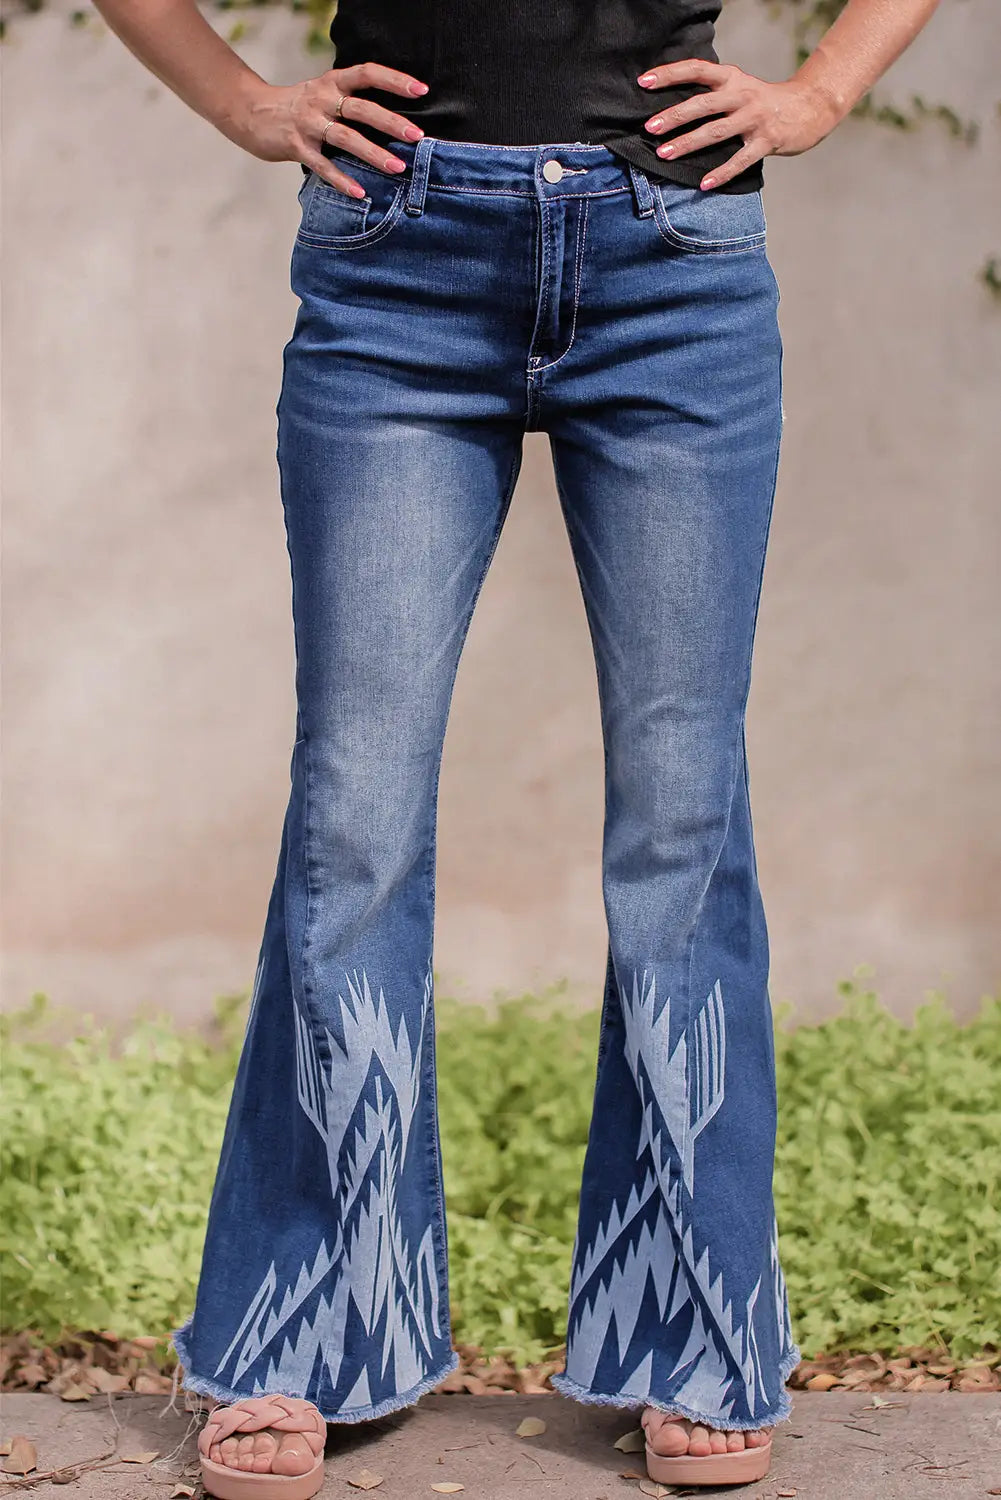 Blue western pattern high rise flare jeans - 6 / 75% cotton + 24% polyester + 1% elastane